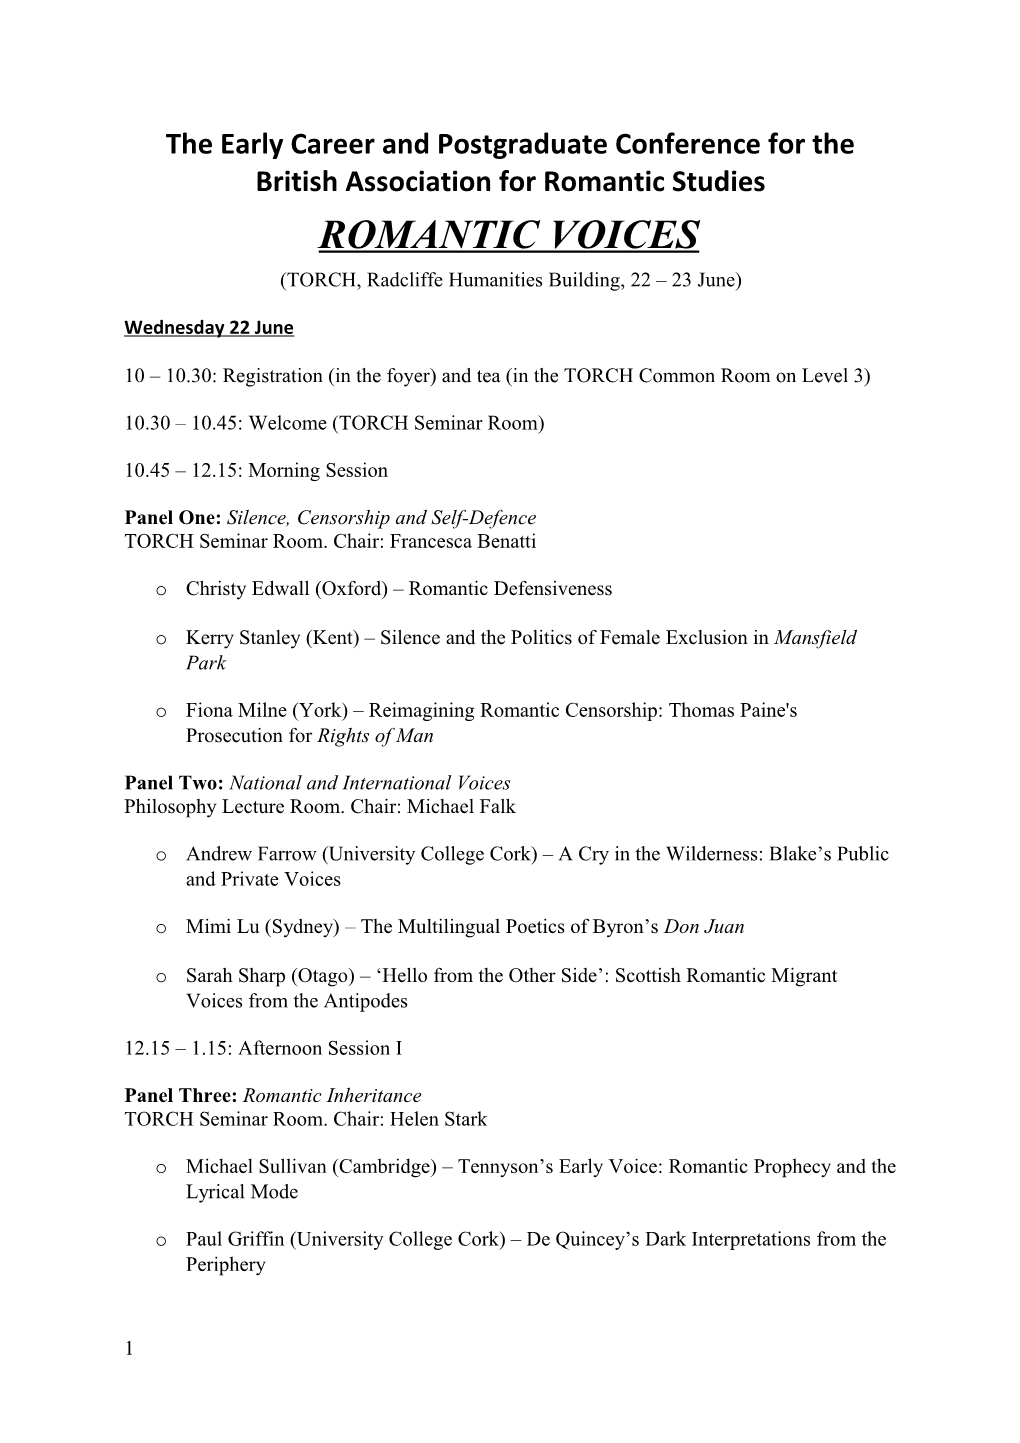 The Early Career and Postgraduate Conference for the British Association for Romantic Studies